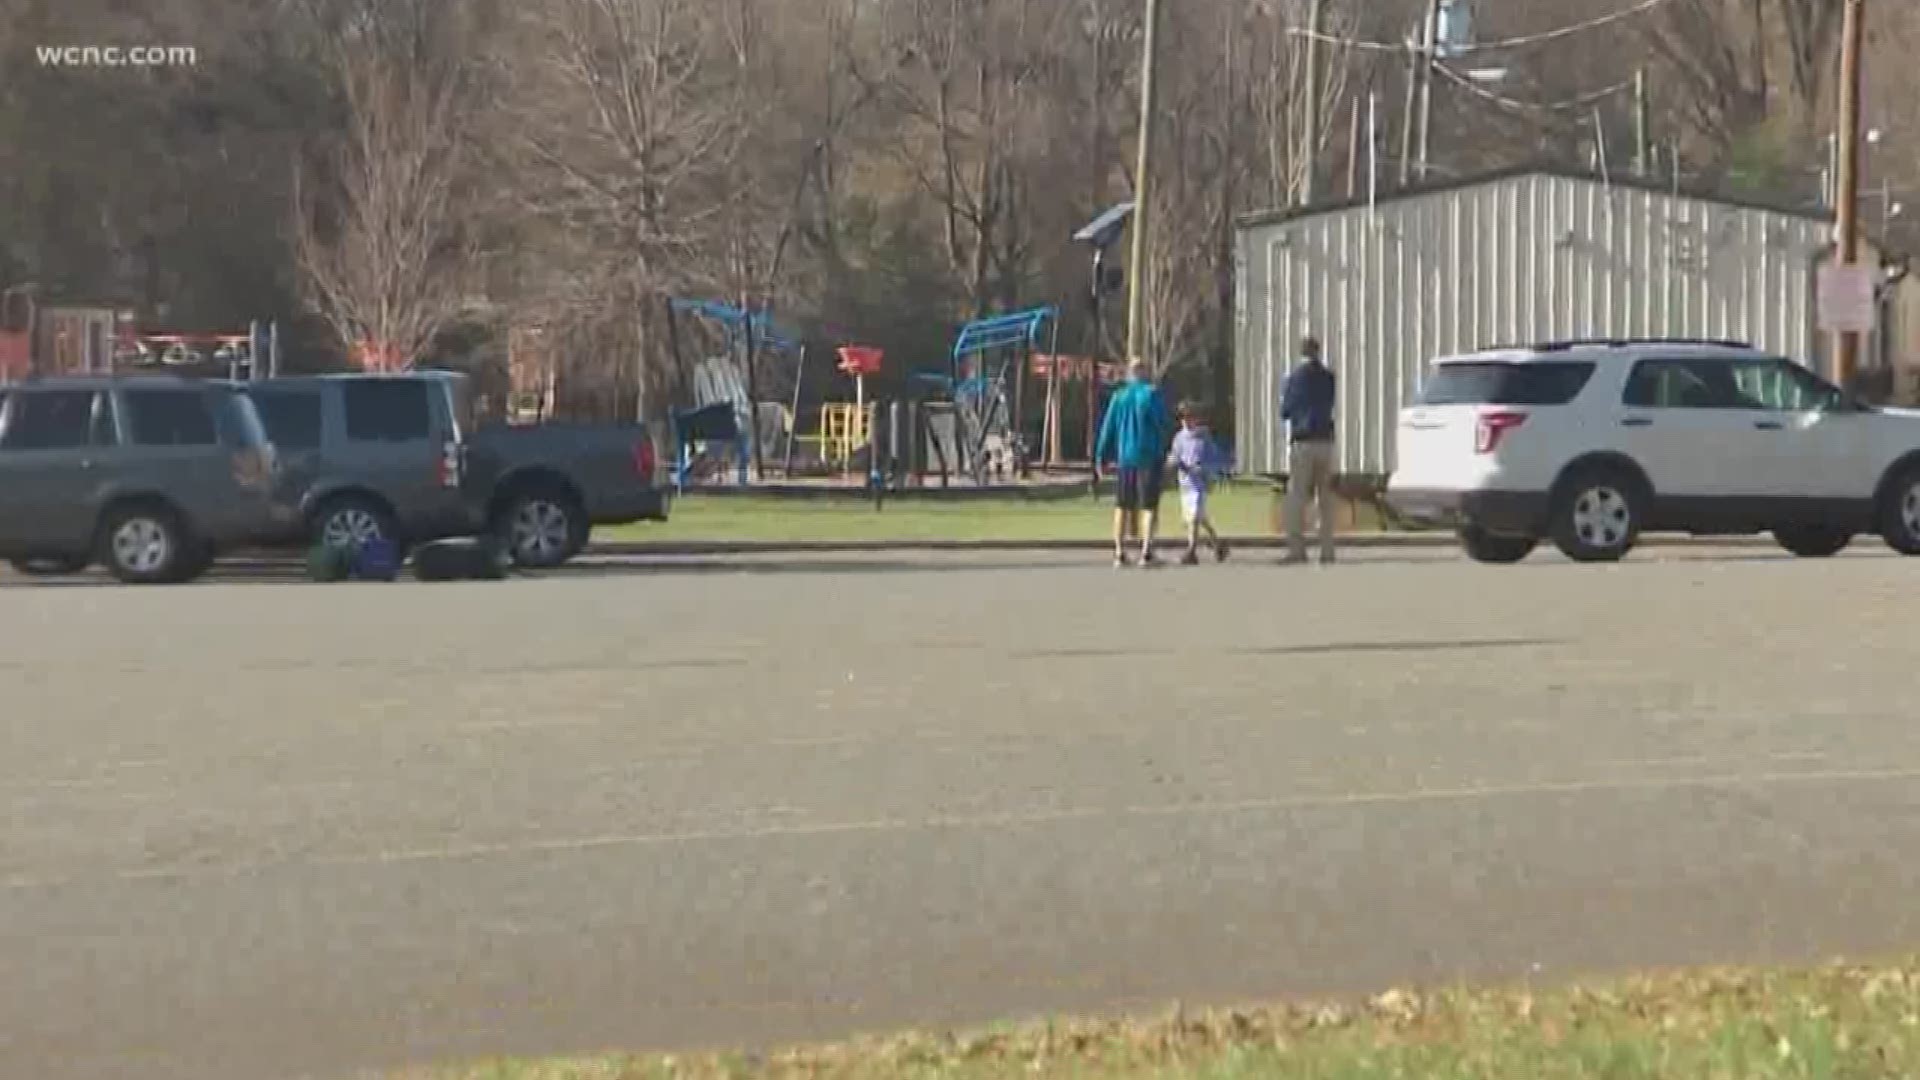 Seven children were bitten by a stray dog, believed to be a pit bull, inside a Charlotte elementary school Monday, police said.